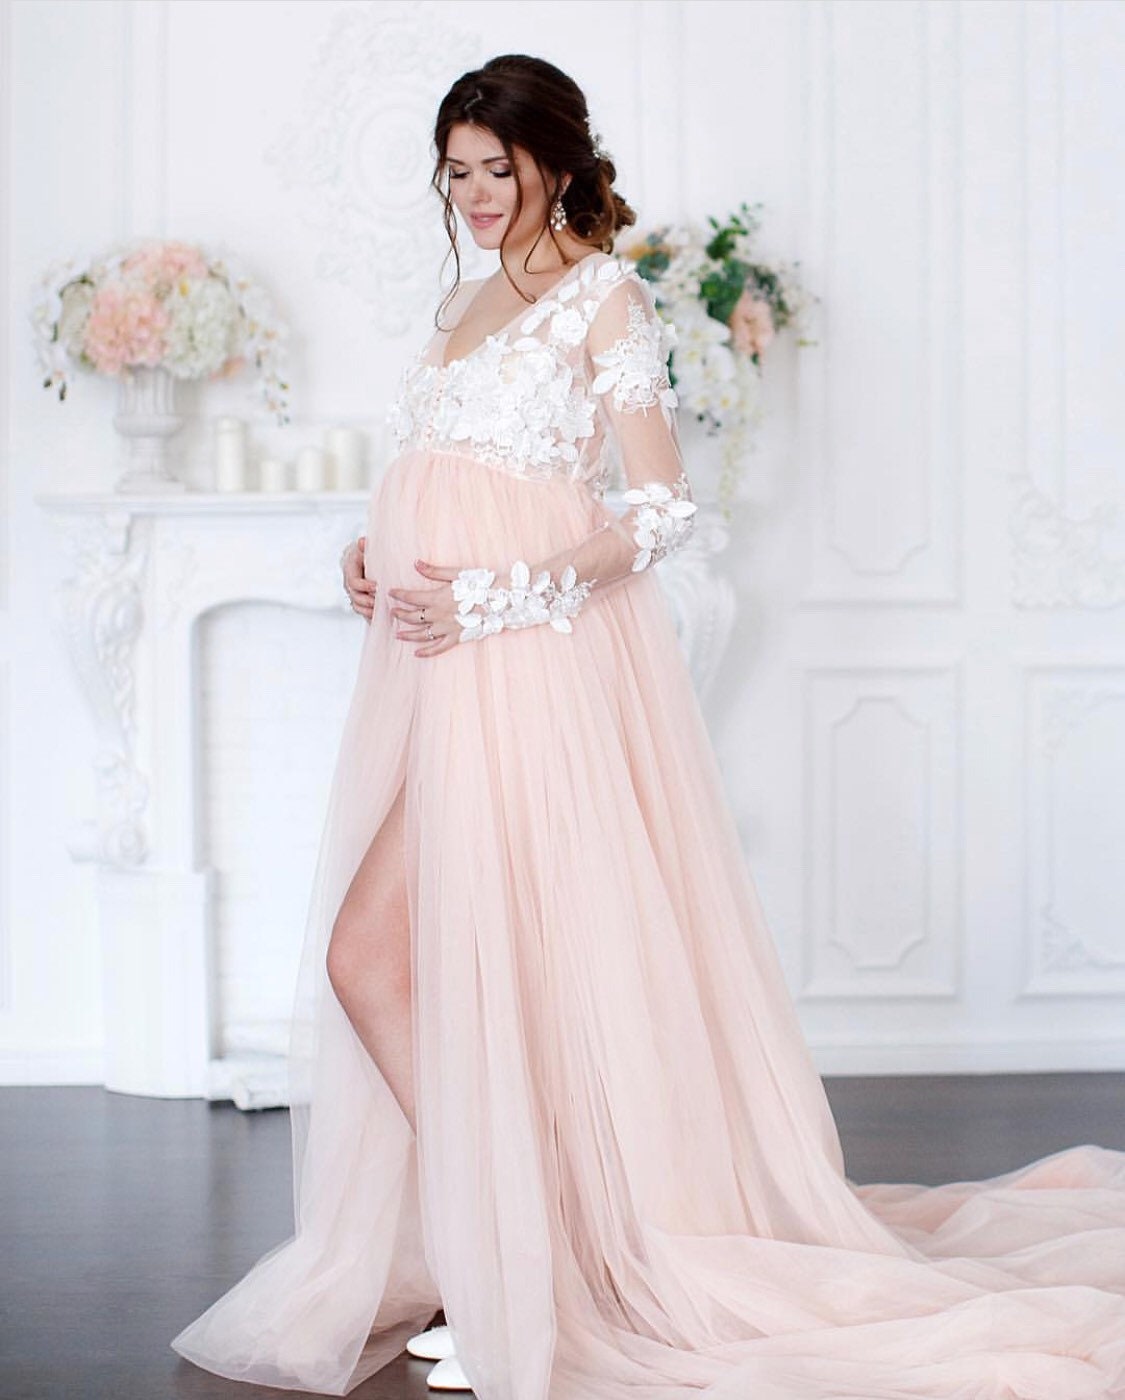 White Lace Maternity Dress for Photo ...